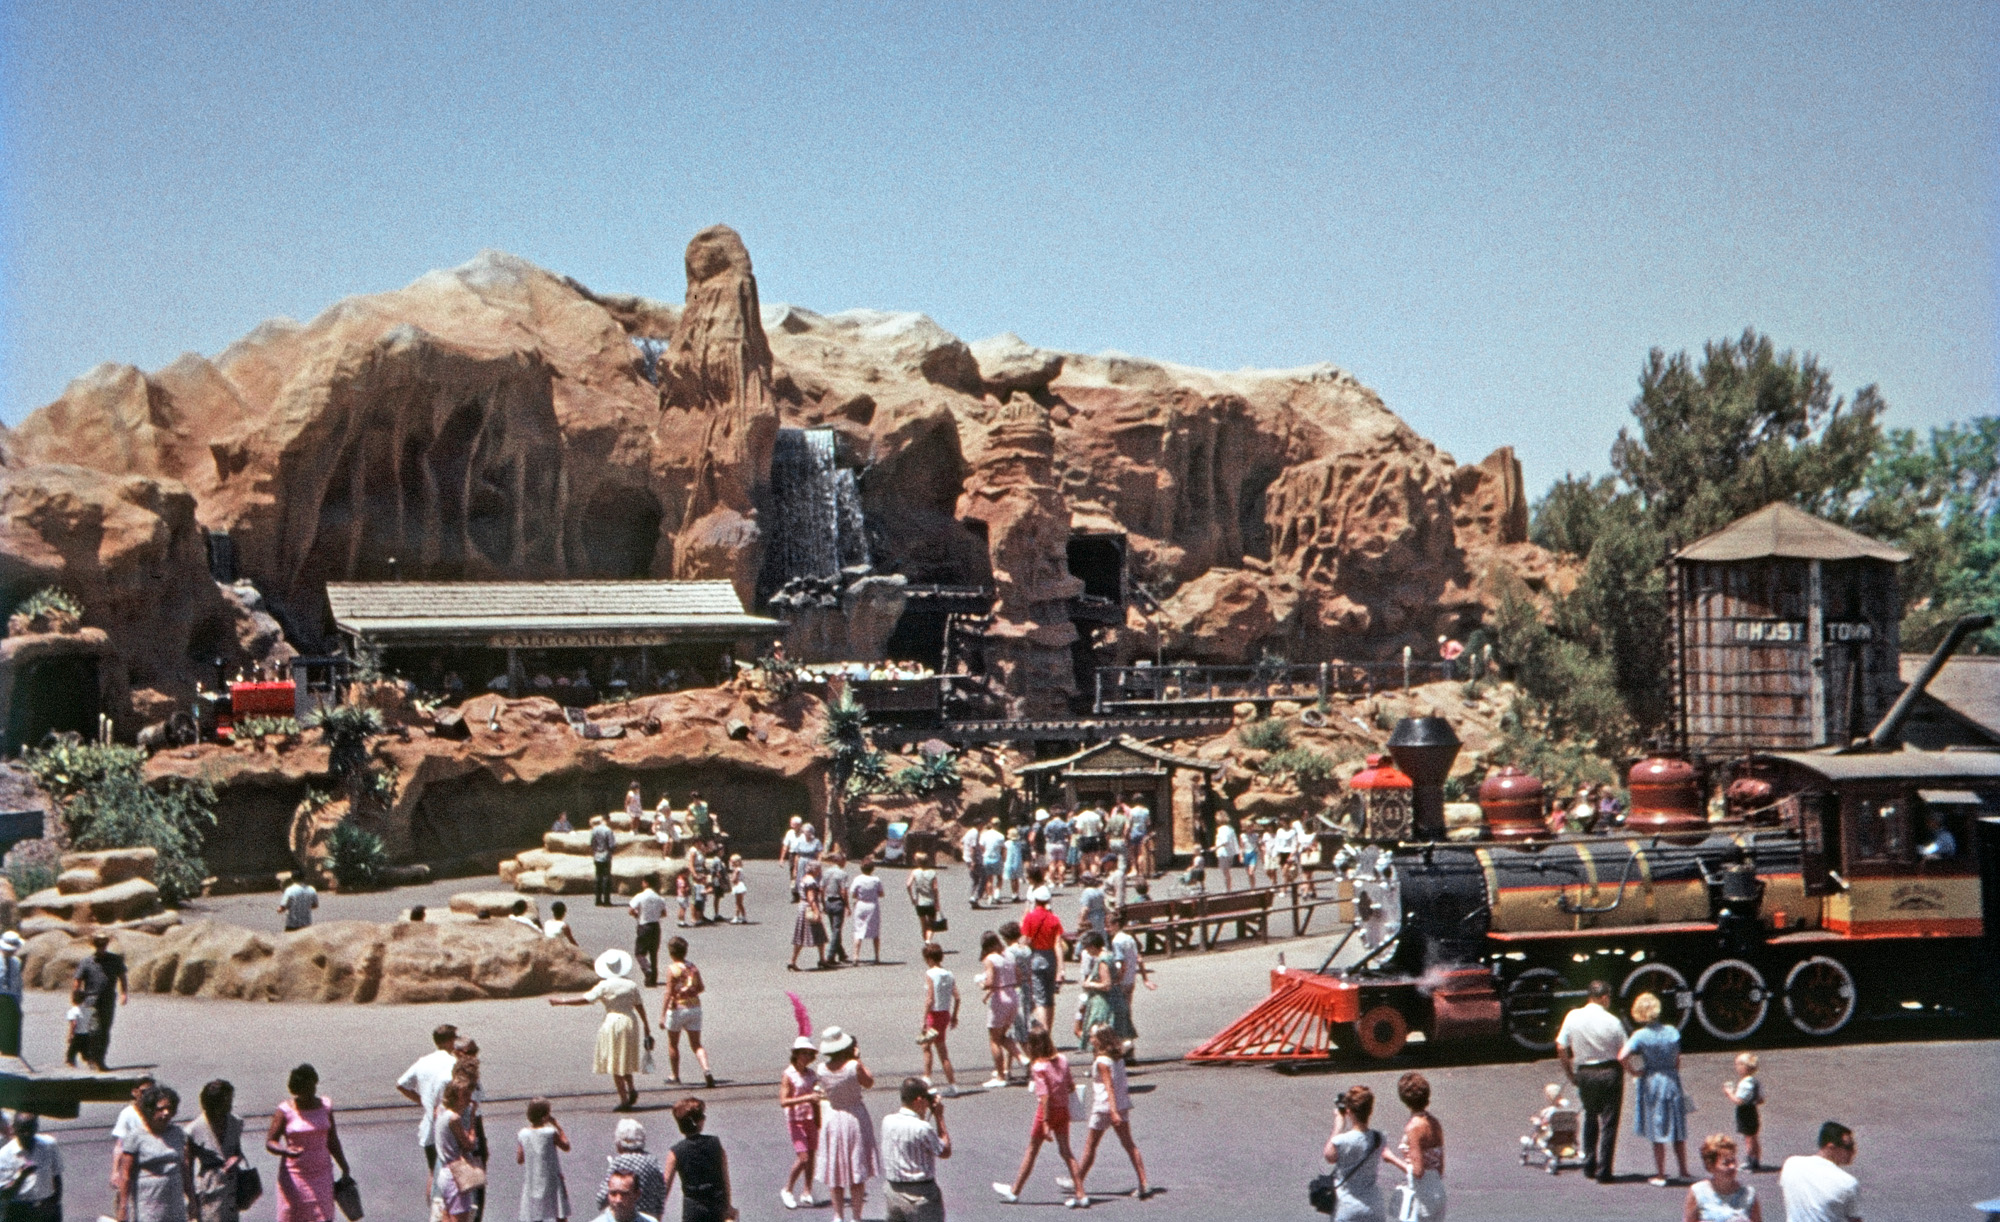 The 1960s saw several SoCal family vacations to visit my sister and her family, and this time the whole slew of us took in Knott's Berry Farm, where I took 18 color slides, as opposed the over 40 I shot in Disneyland. So that'll show you. Faux-reality fan that I was, I liked wandering around Knott's old western-style buildings, cement cliffs and miniature buildings, but no doubt about it, Disneyland was my heaven on earth. Oh, and it was nice seeing the family, too. View full size.